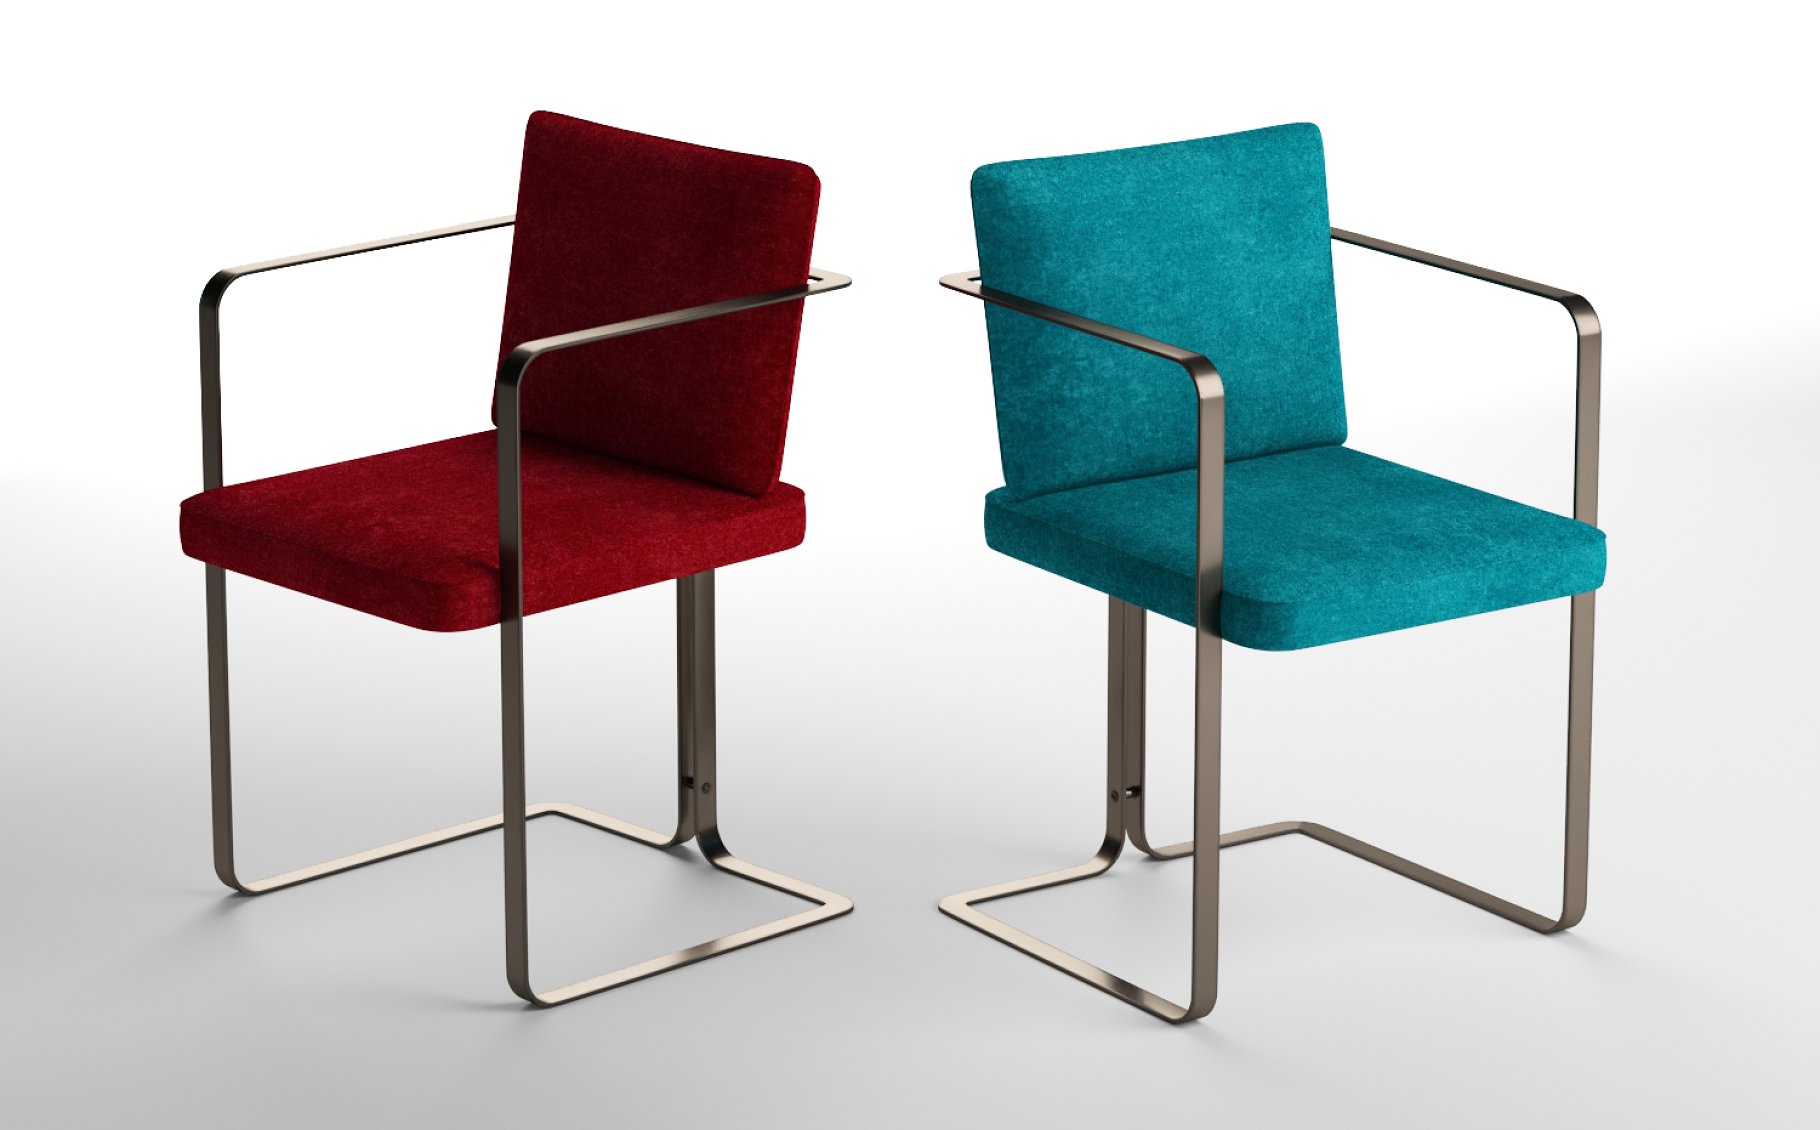 Rendering of a beautiful 3d model of an armchair in two colors